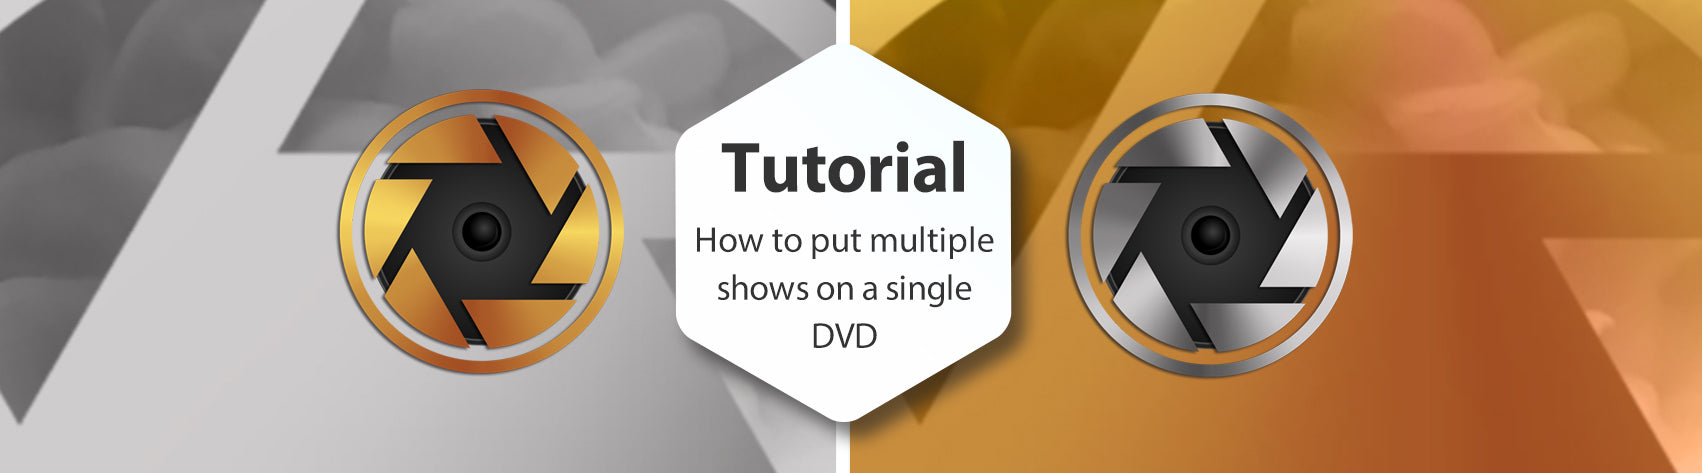 Lesson - How to put multiple shows on one DVD